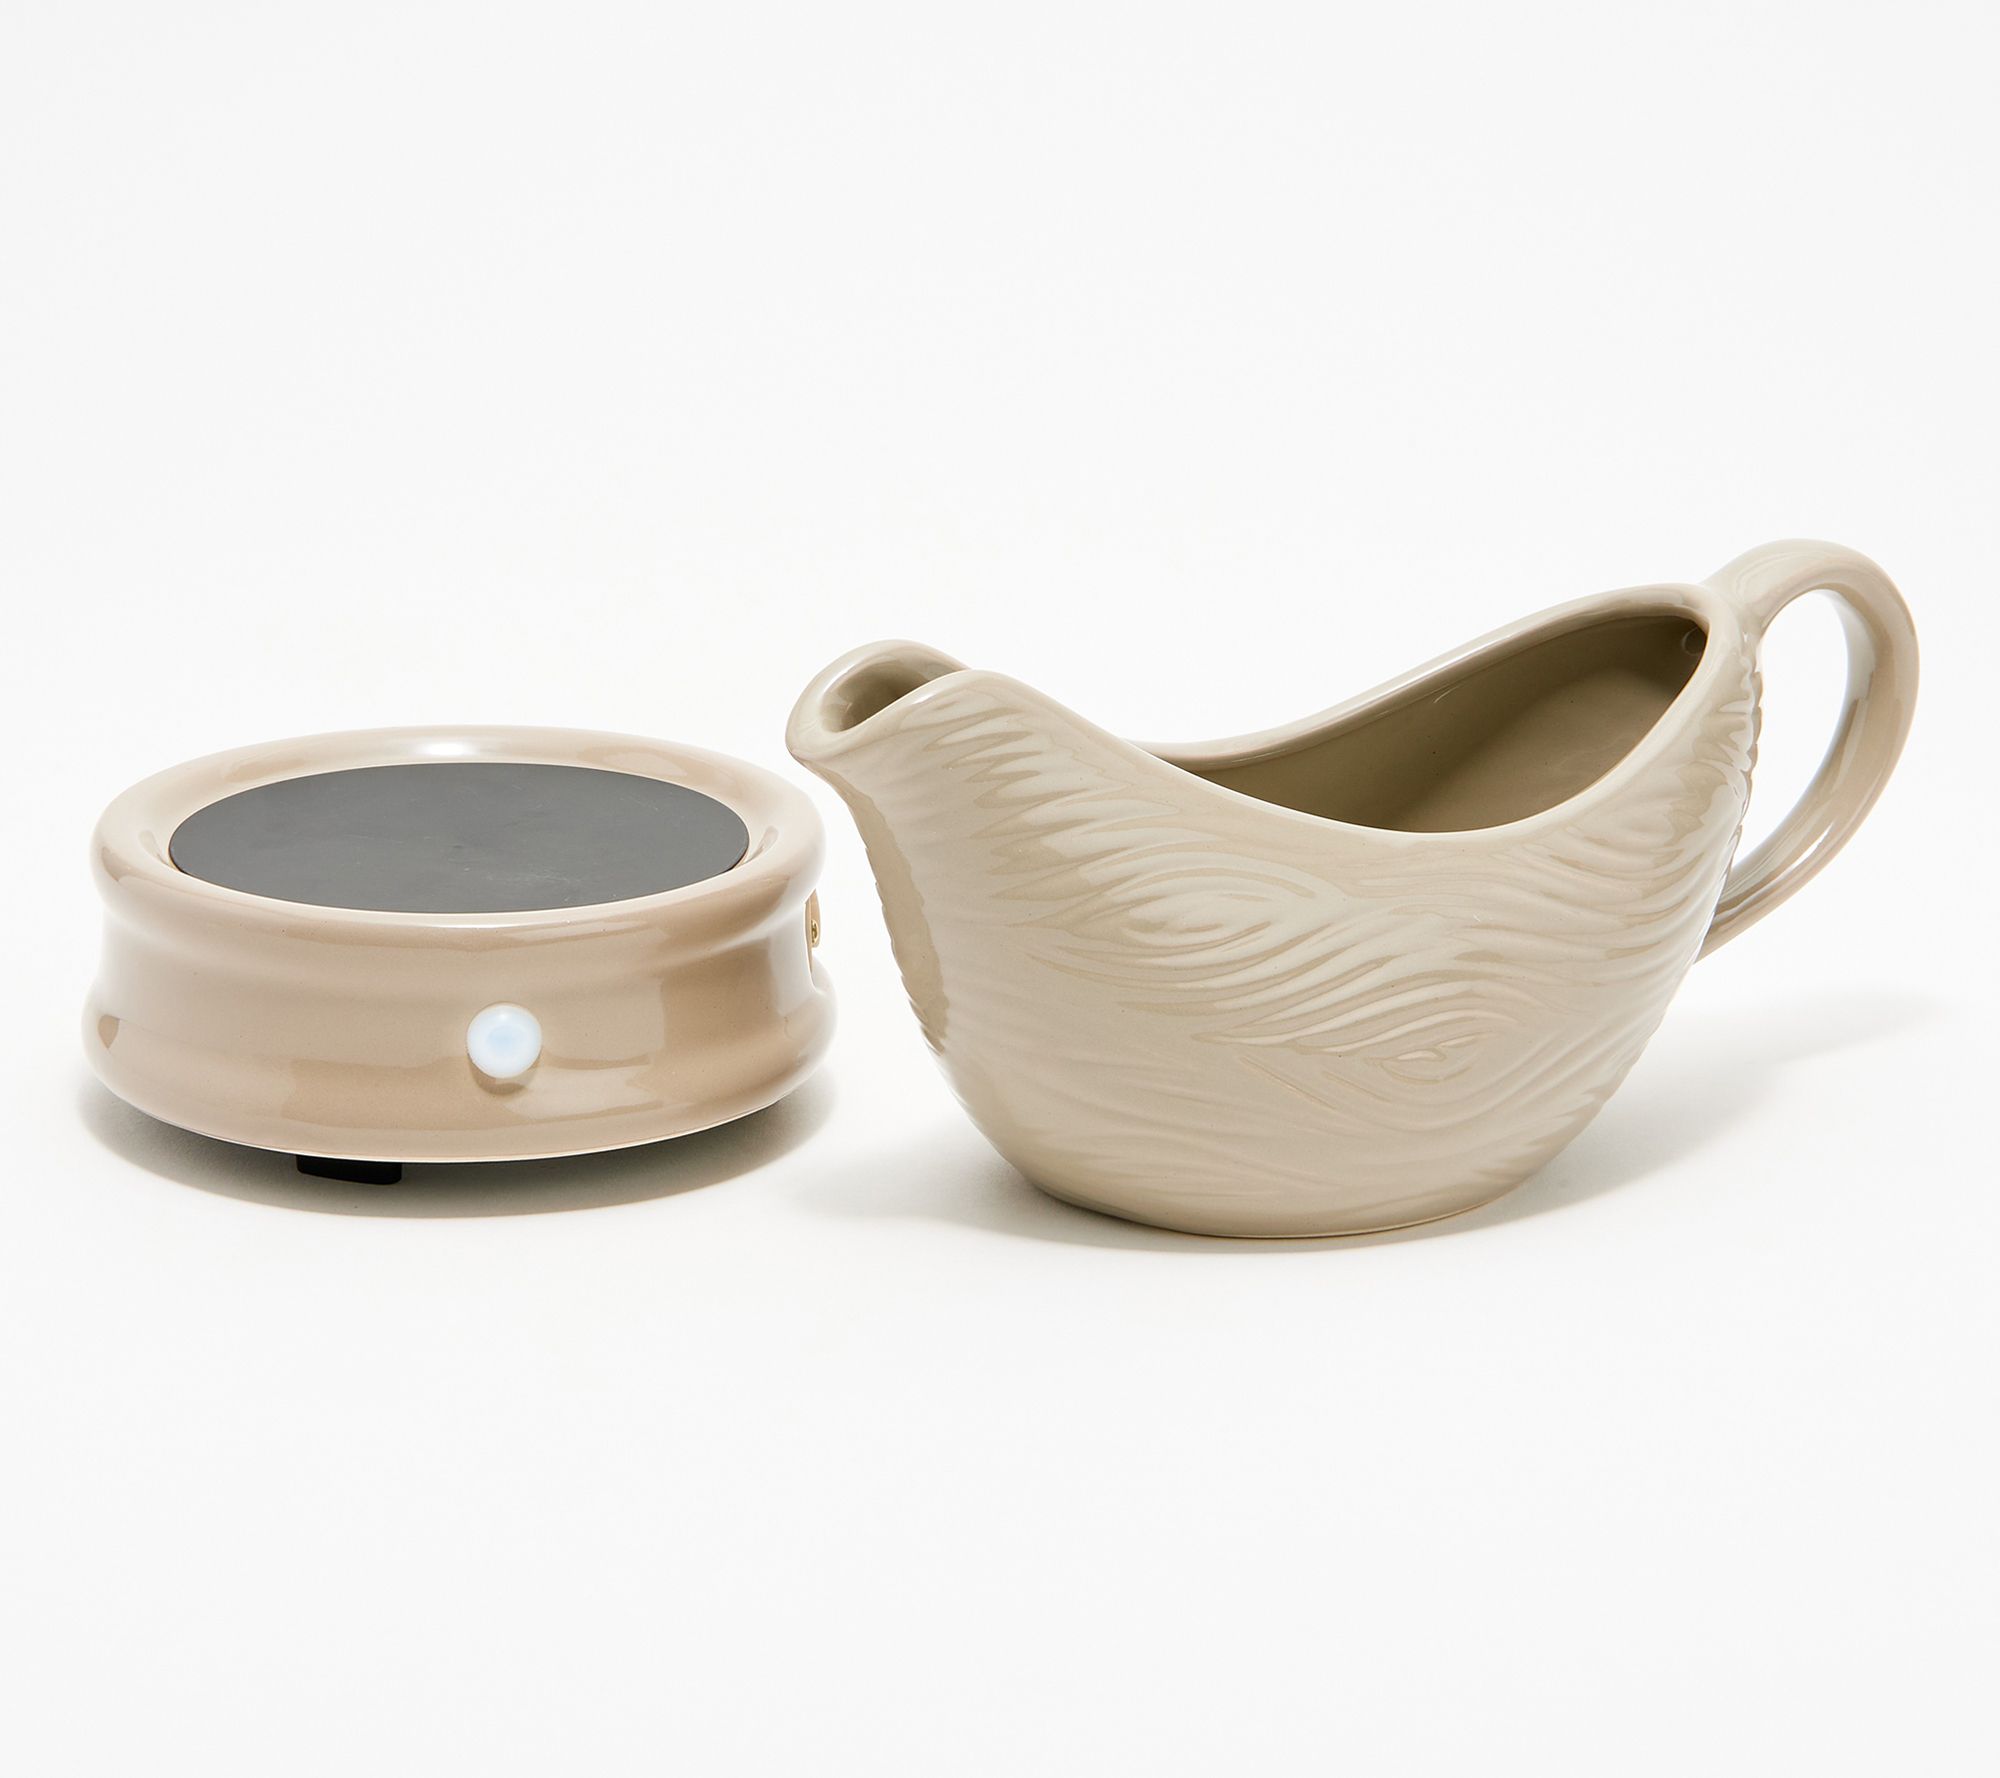 Gravy Boat Warmer (White) with Stand - 2 Piece Set for serving  Warm Gravy, Sauces, Milk, Salad Dressings & More: Gravy Boats